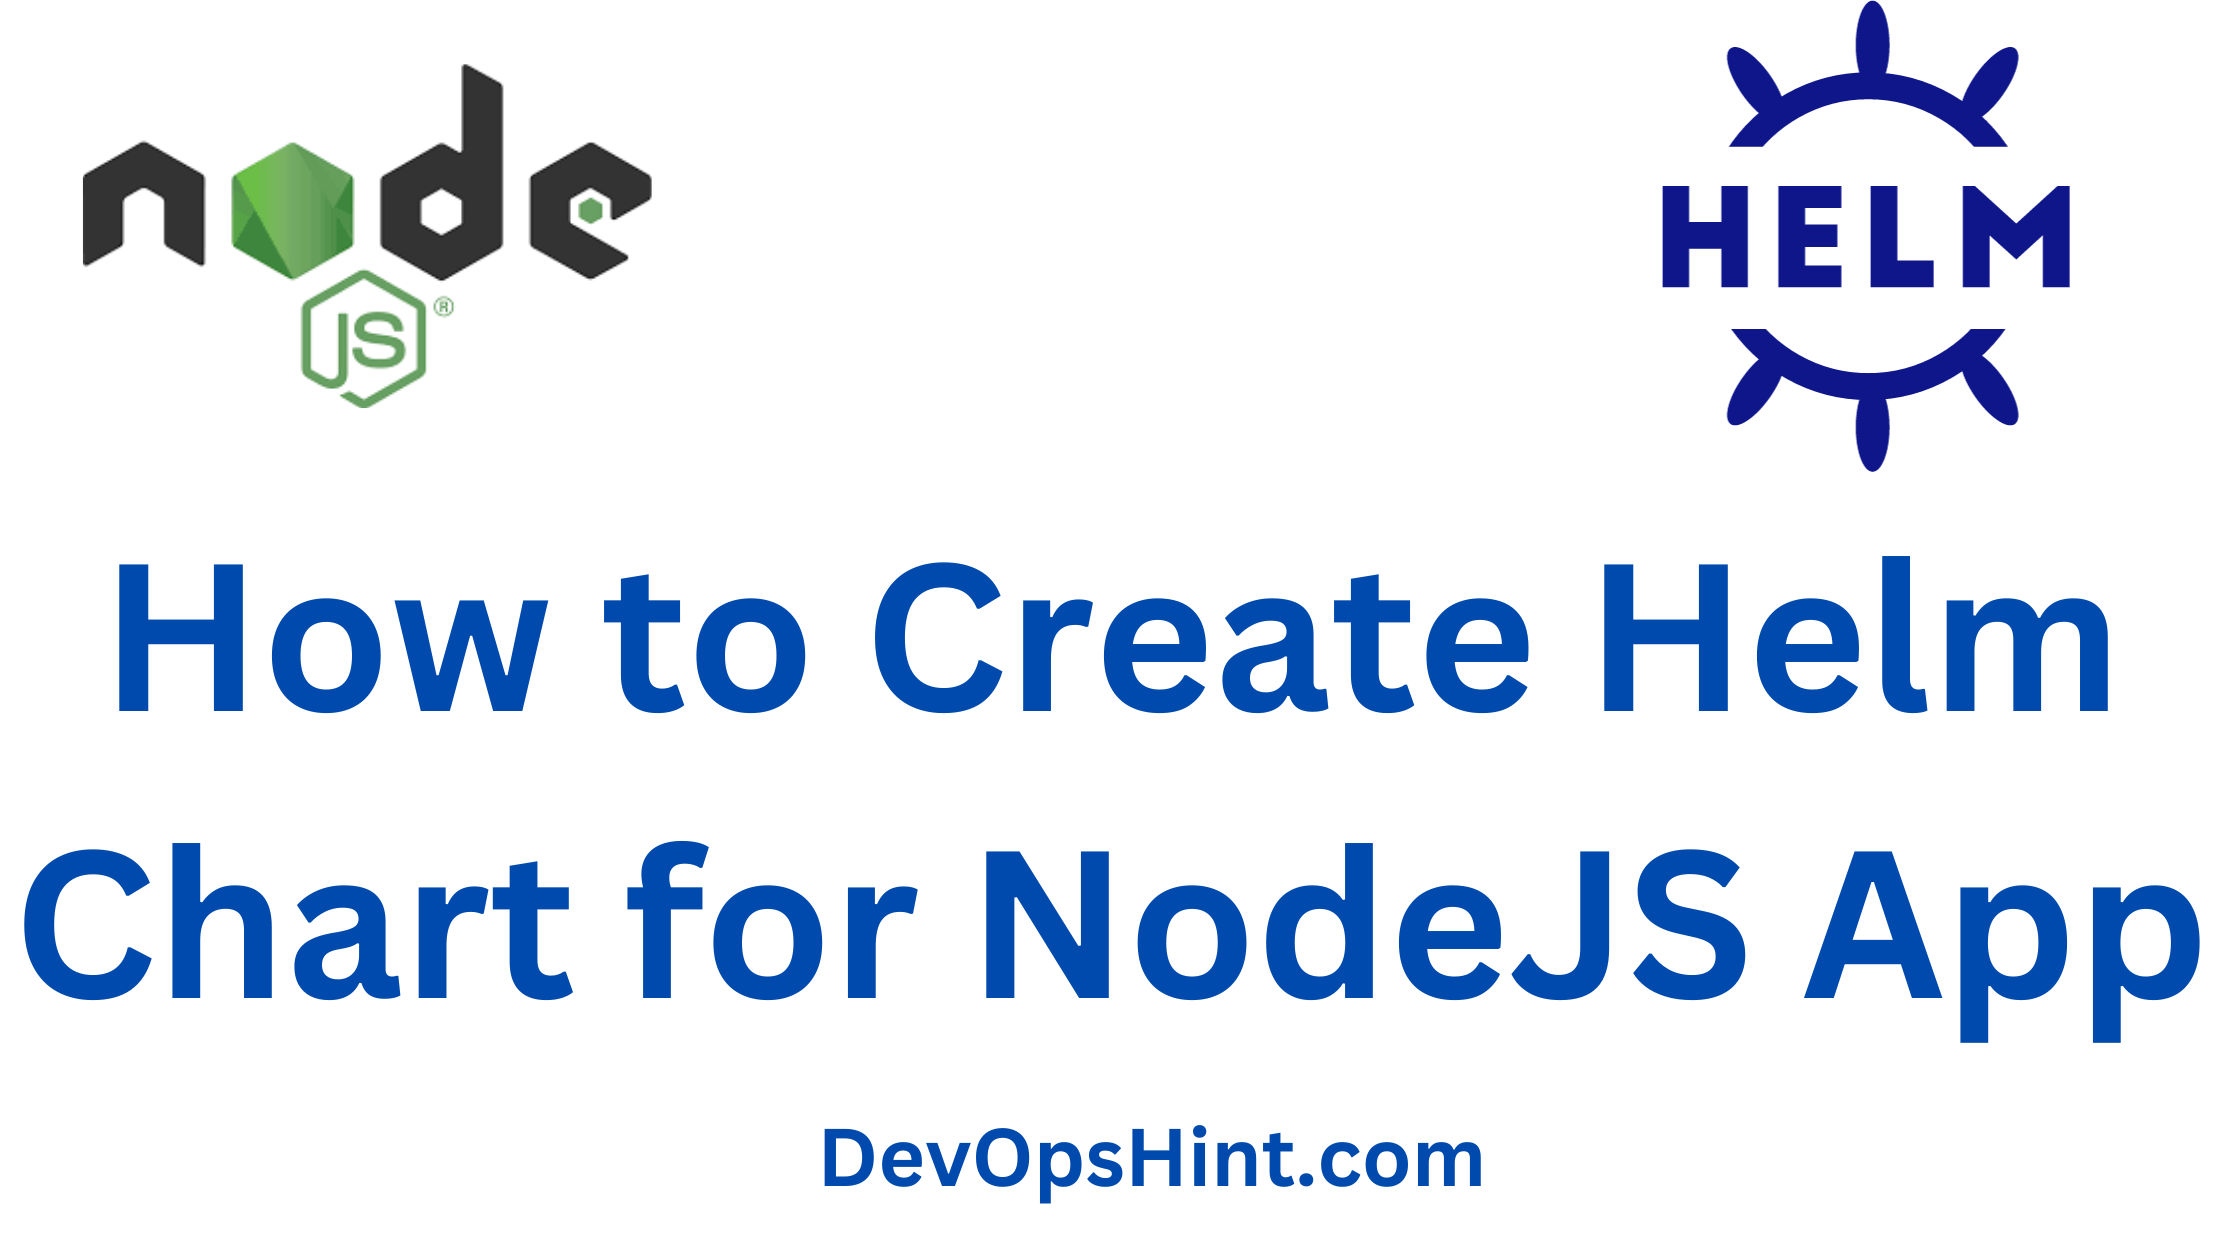 How to Create Helm Chart for NodeJS App